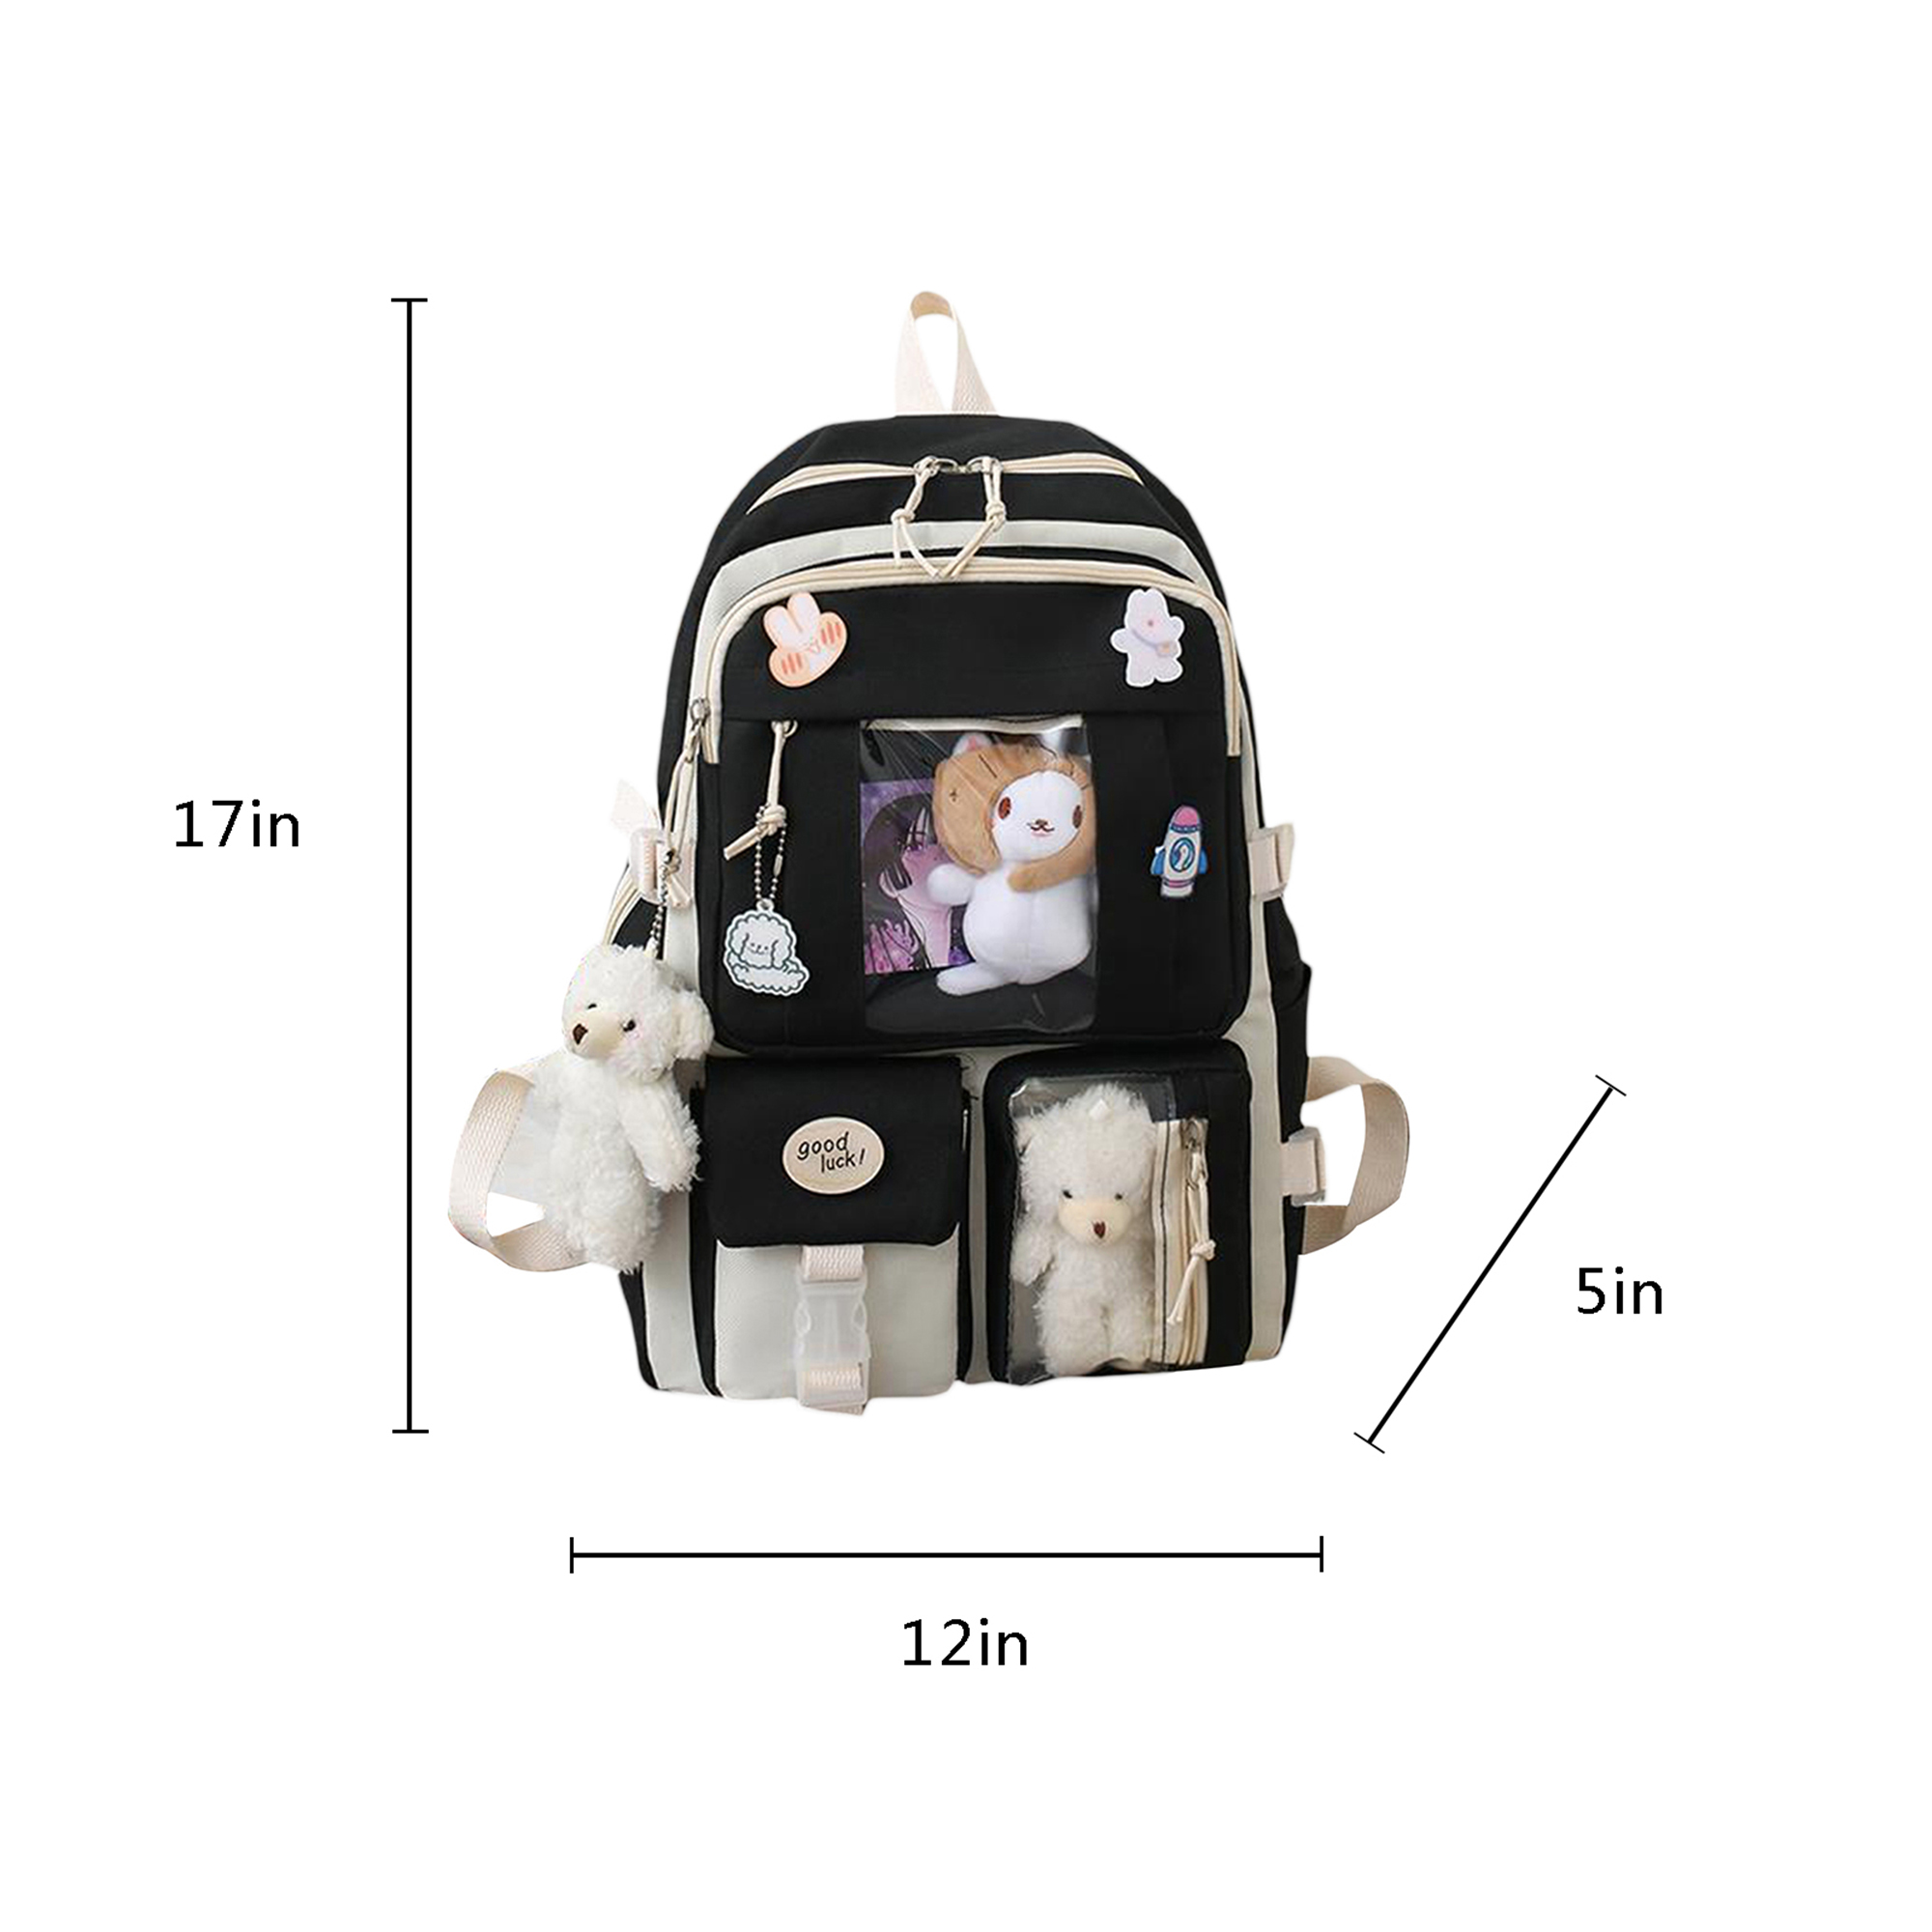 Cute Backpacks for Teen Girls, 16 Inch Kawaii Backpack with Kawaii Pin and Accessories, 5Pcs Backpack Set,Backpack,Drawstring Bag, Shoulderbag, Pencil Case and Wallet - image 2 of 7